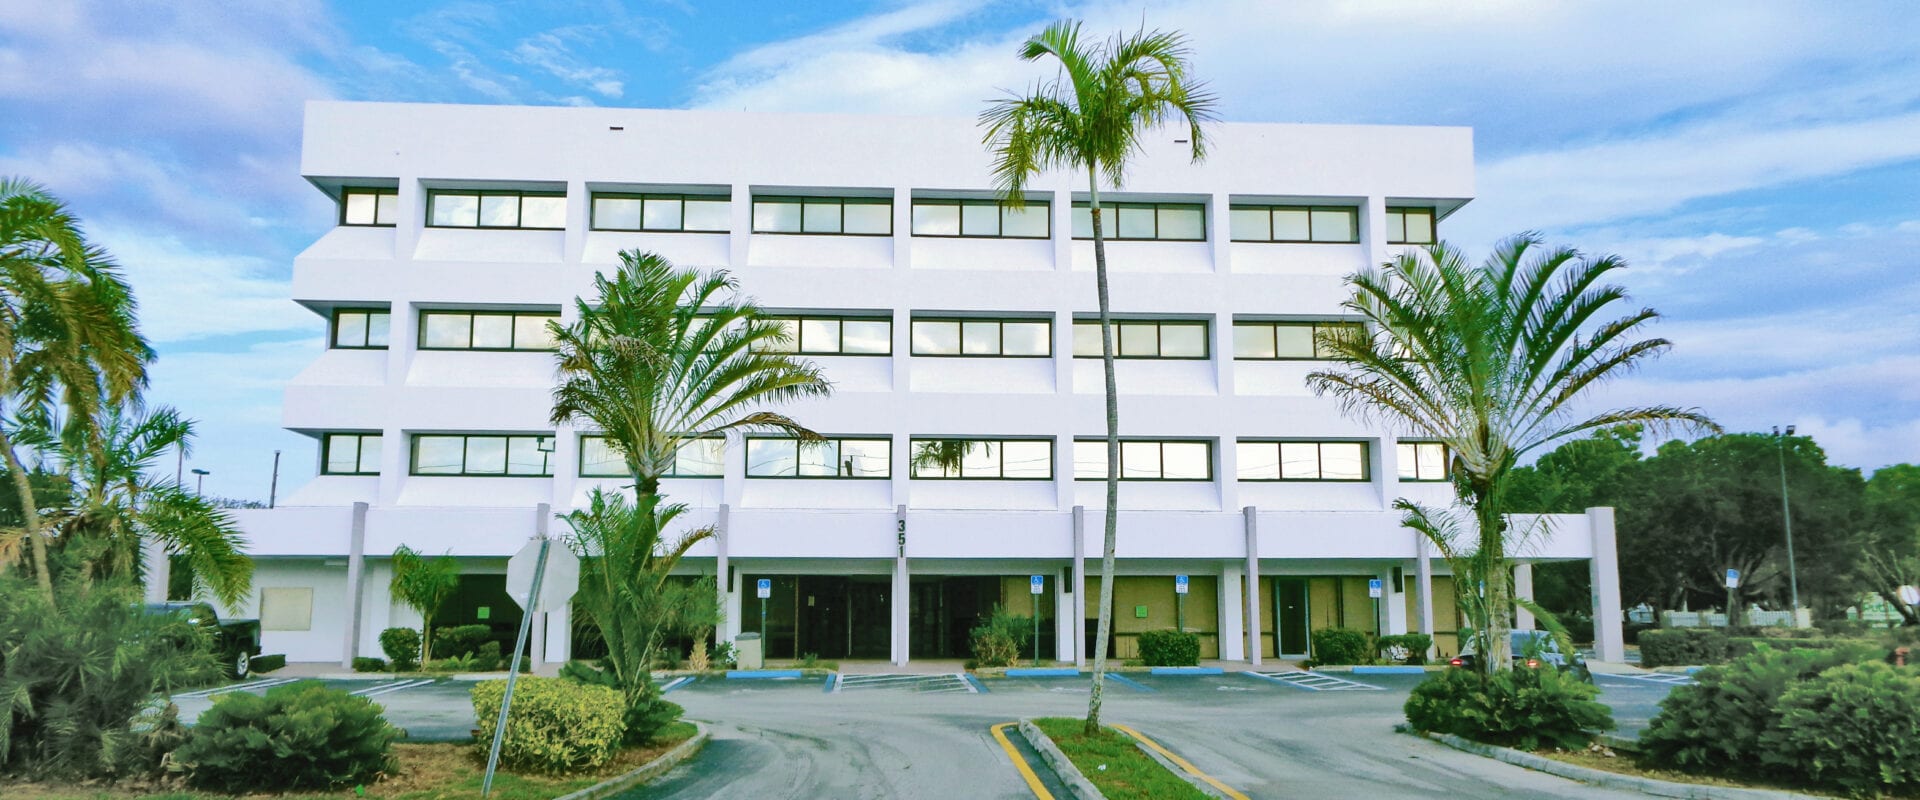 For Lease Office Space Pompano Beach 290 SF